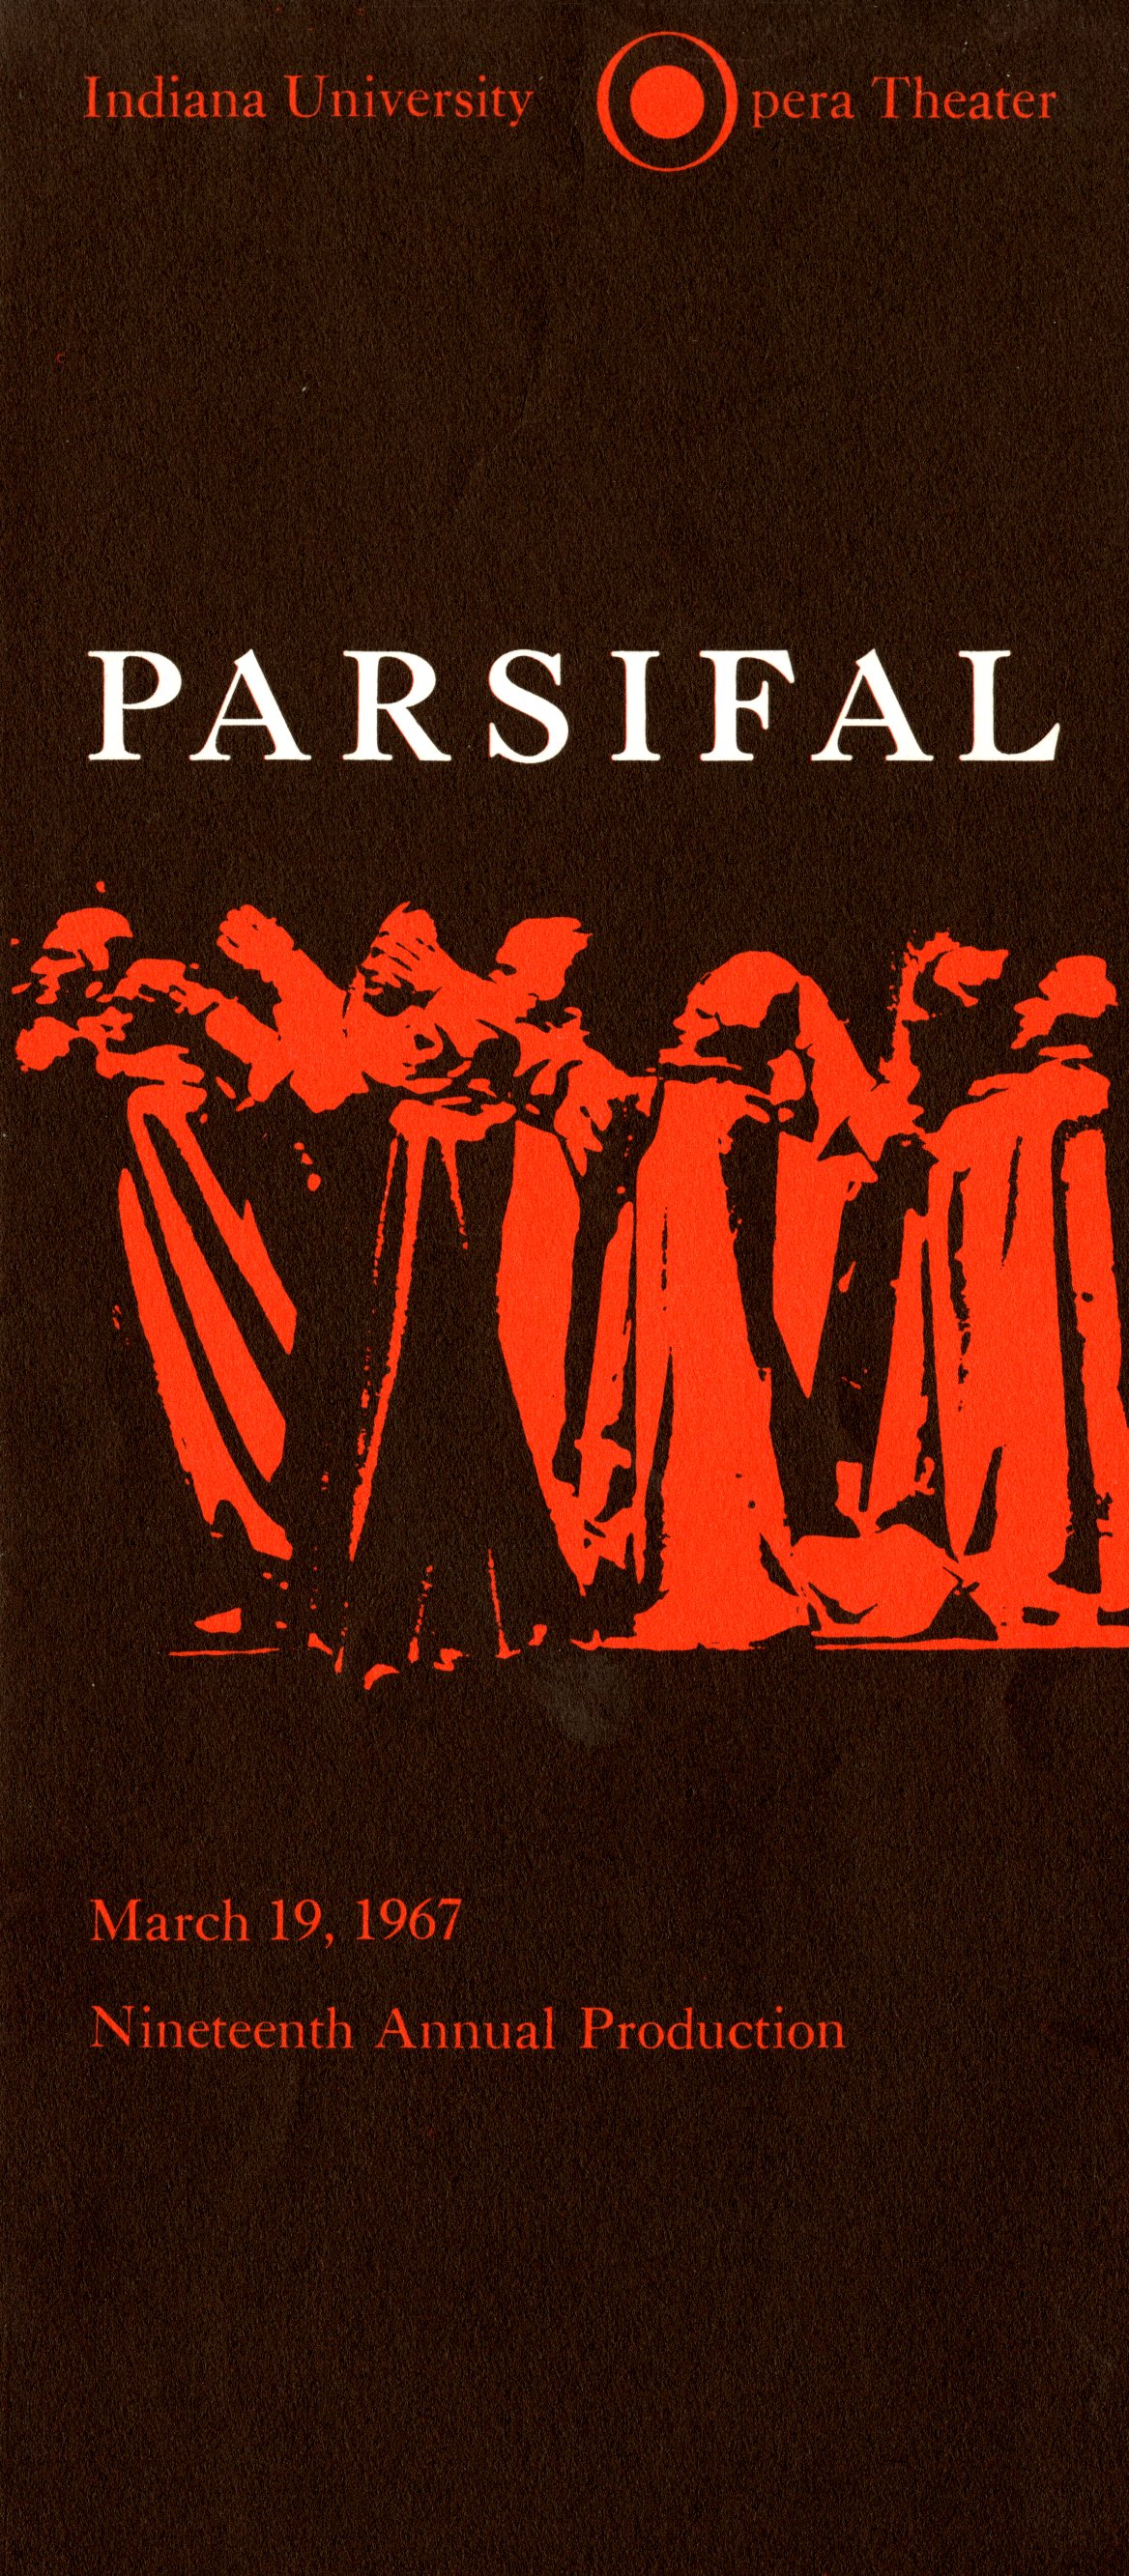 Red and black program with the following text "Indiana University Opera Theater - Parsifal March 19, 1967, 19th annual production"